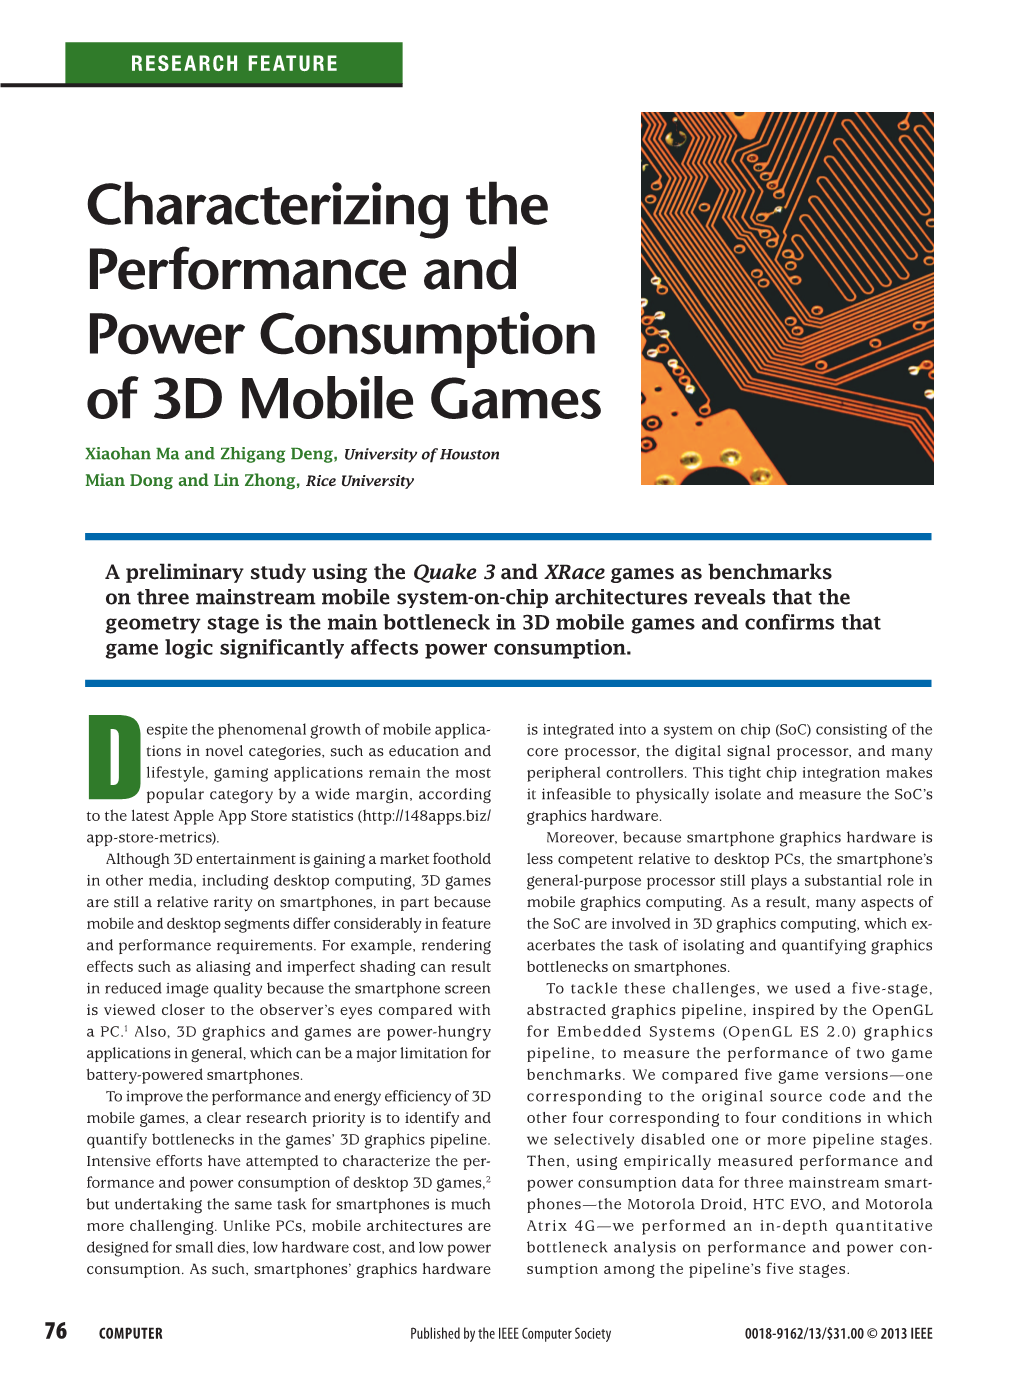 Characterizing the Performance and Power Consumption of 3D Mobile Games